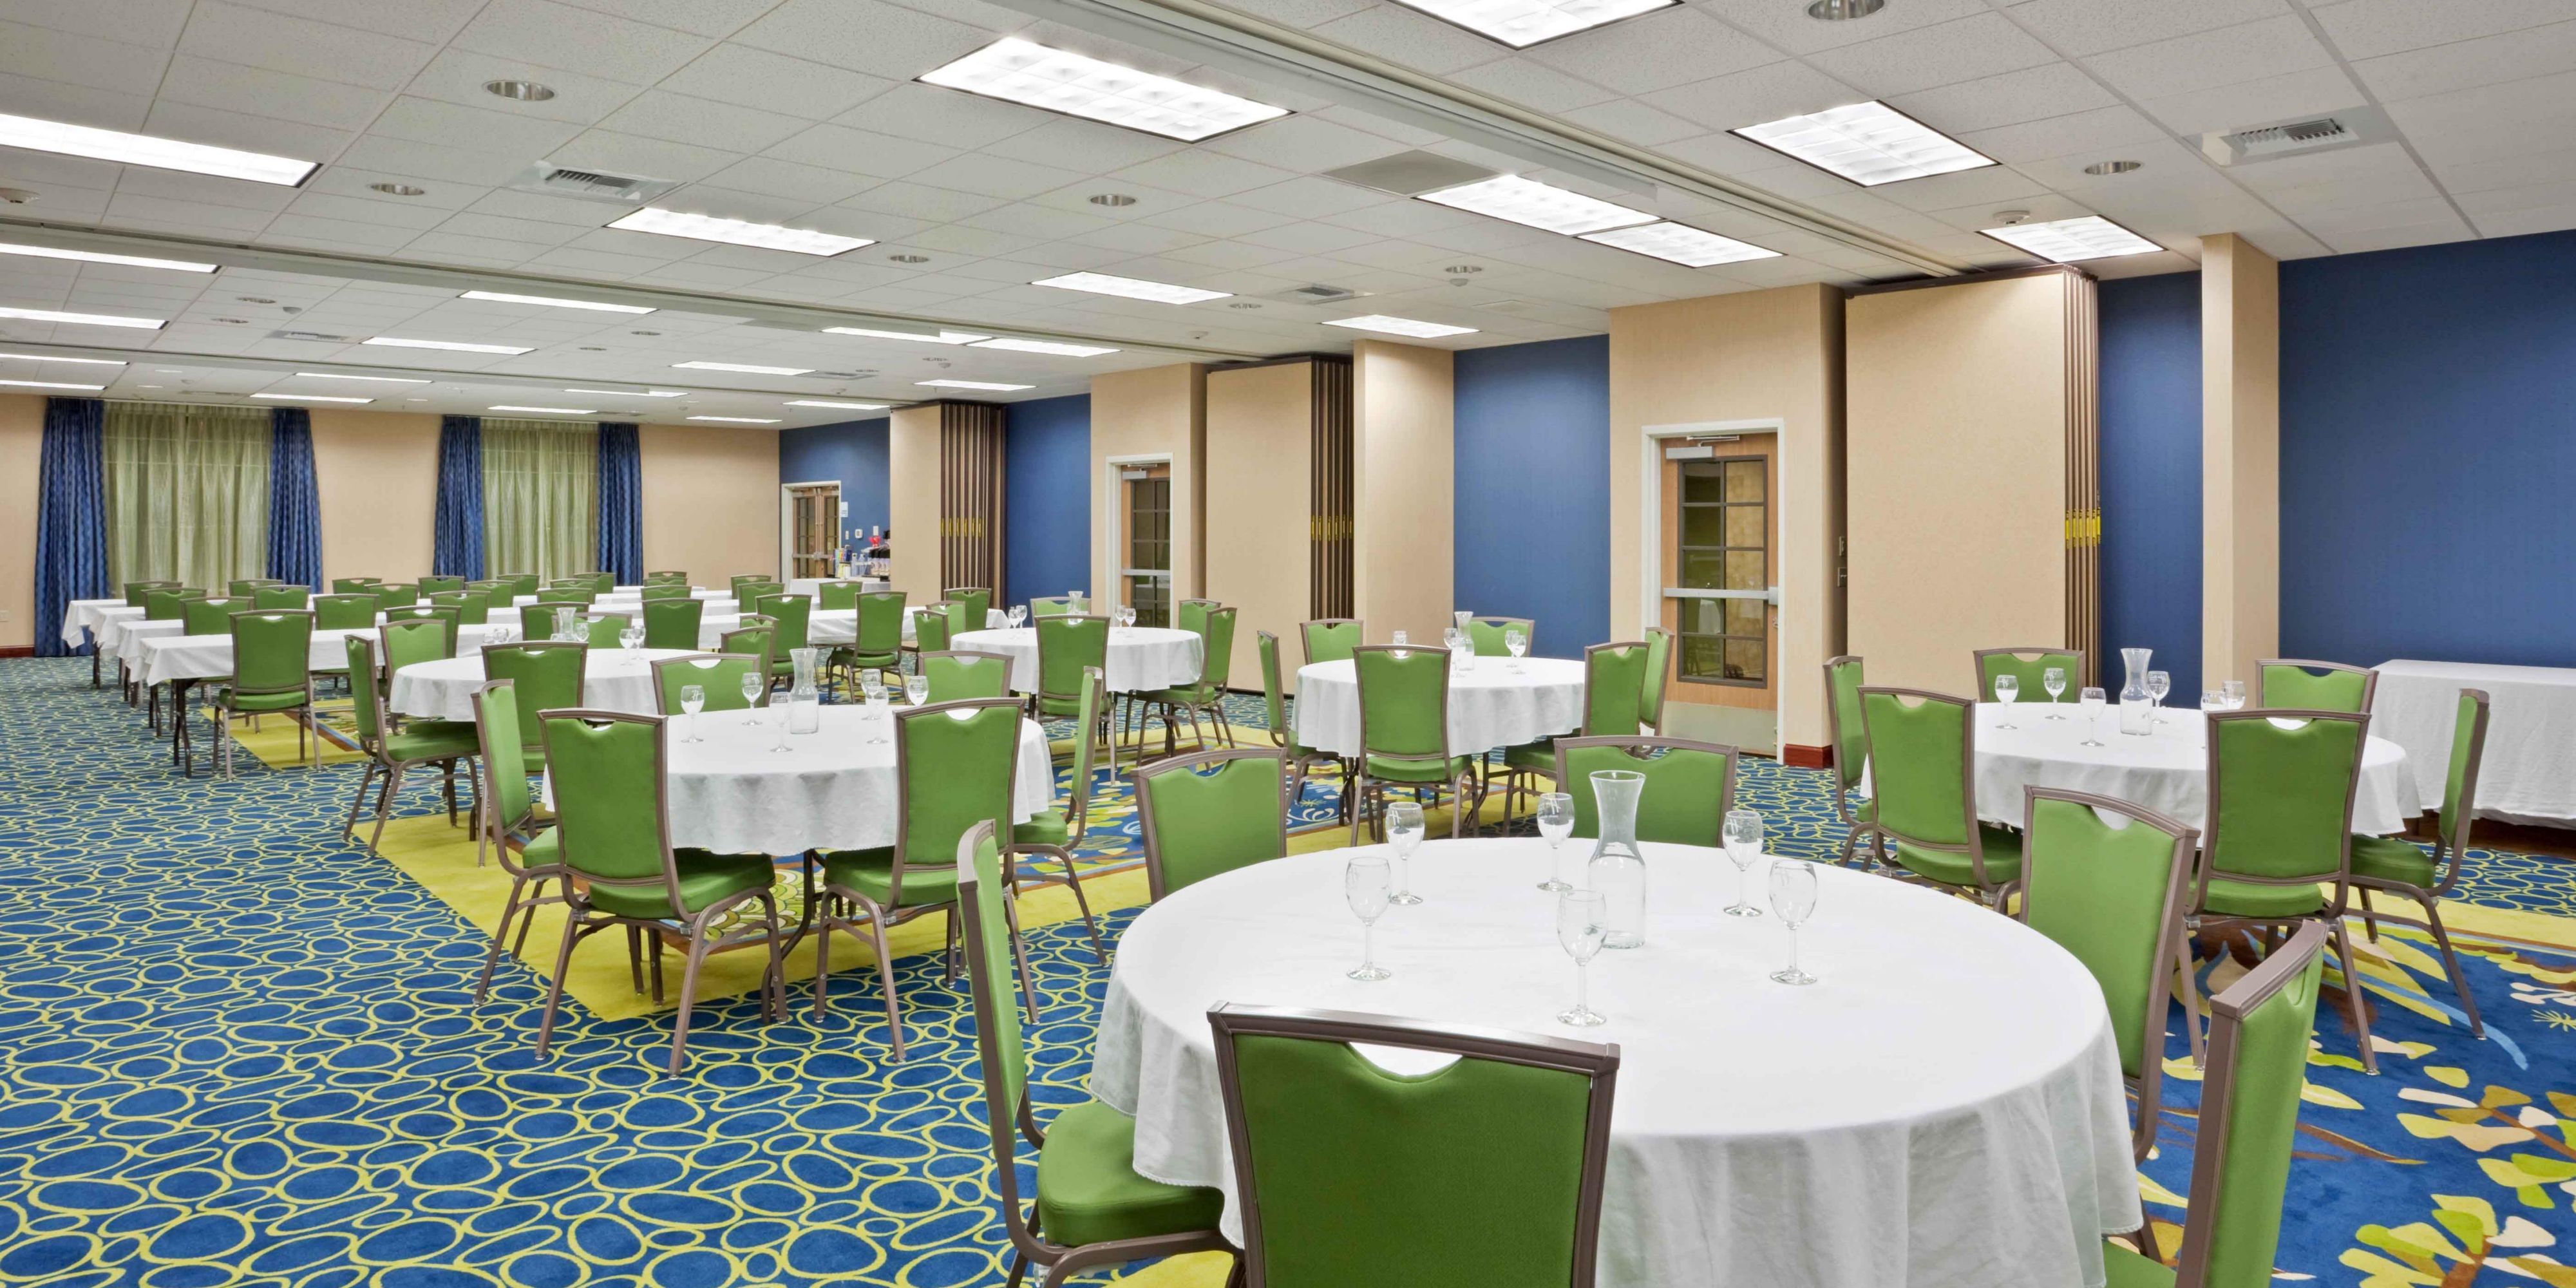 We've got your meeting needs covered with our 2,500 square feet of meeting space, which can be used as 1 meeting room or 4 breakout rooms. Take advantage of our pre-function area with massage chairs! We also have games available upon request.